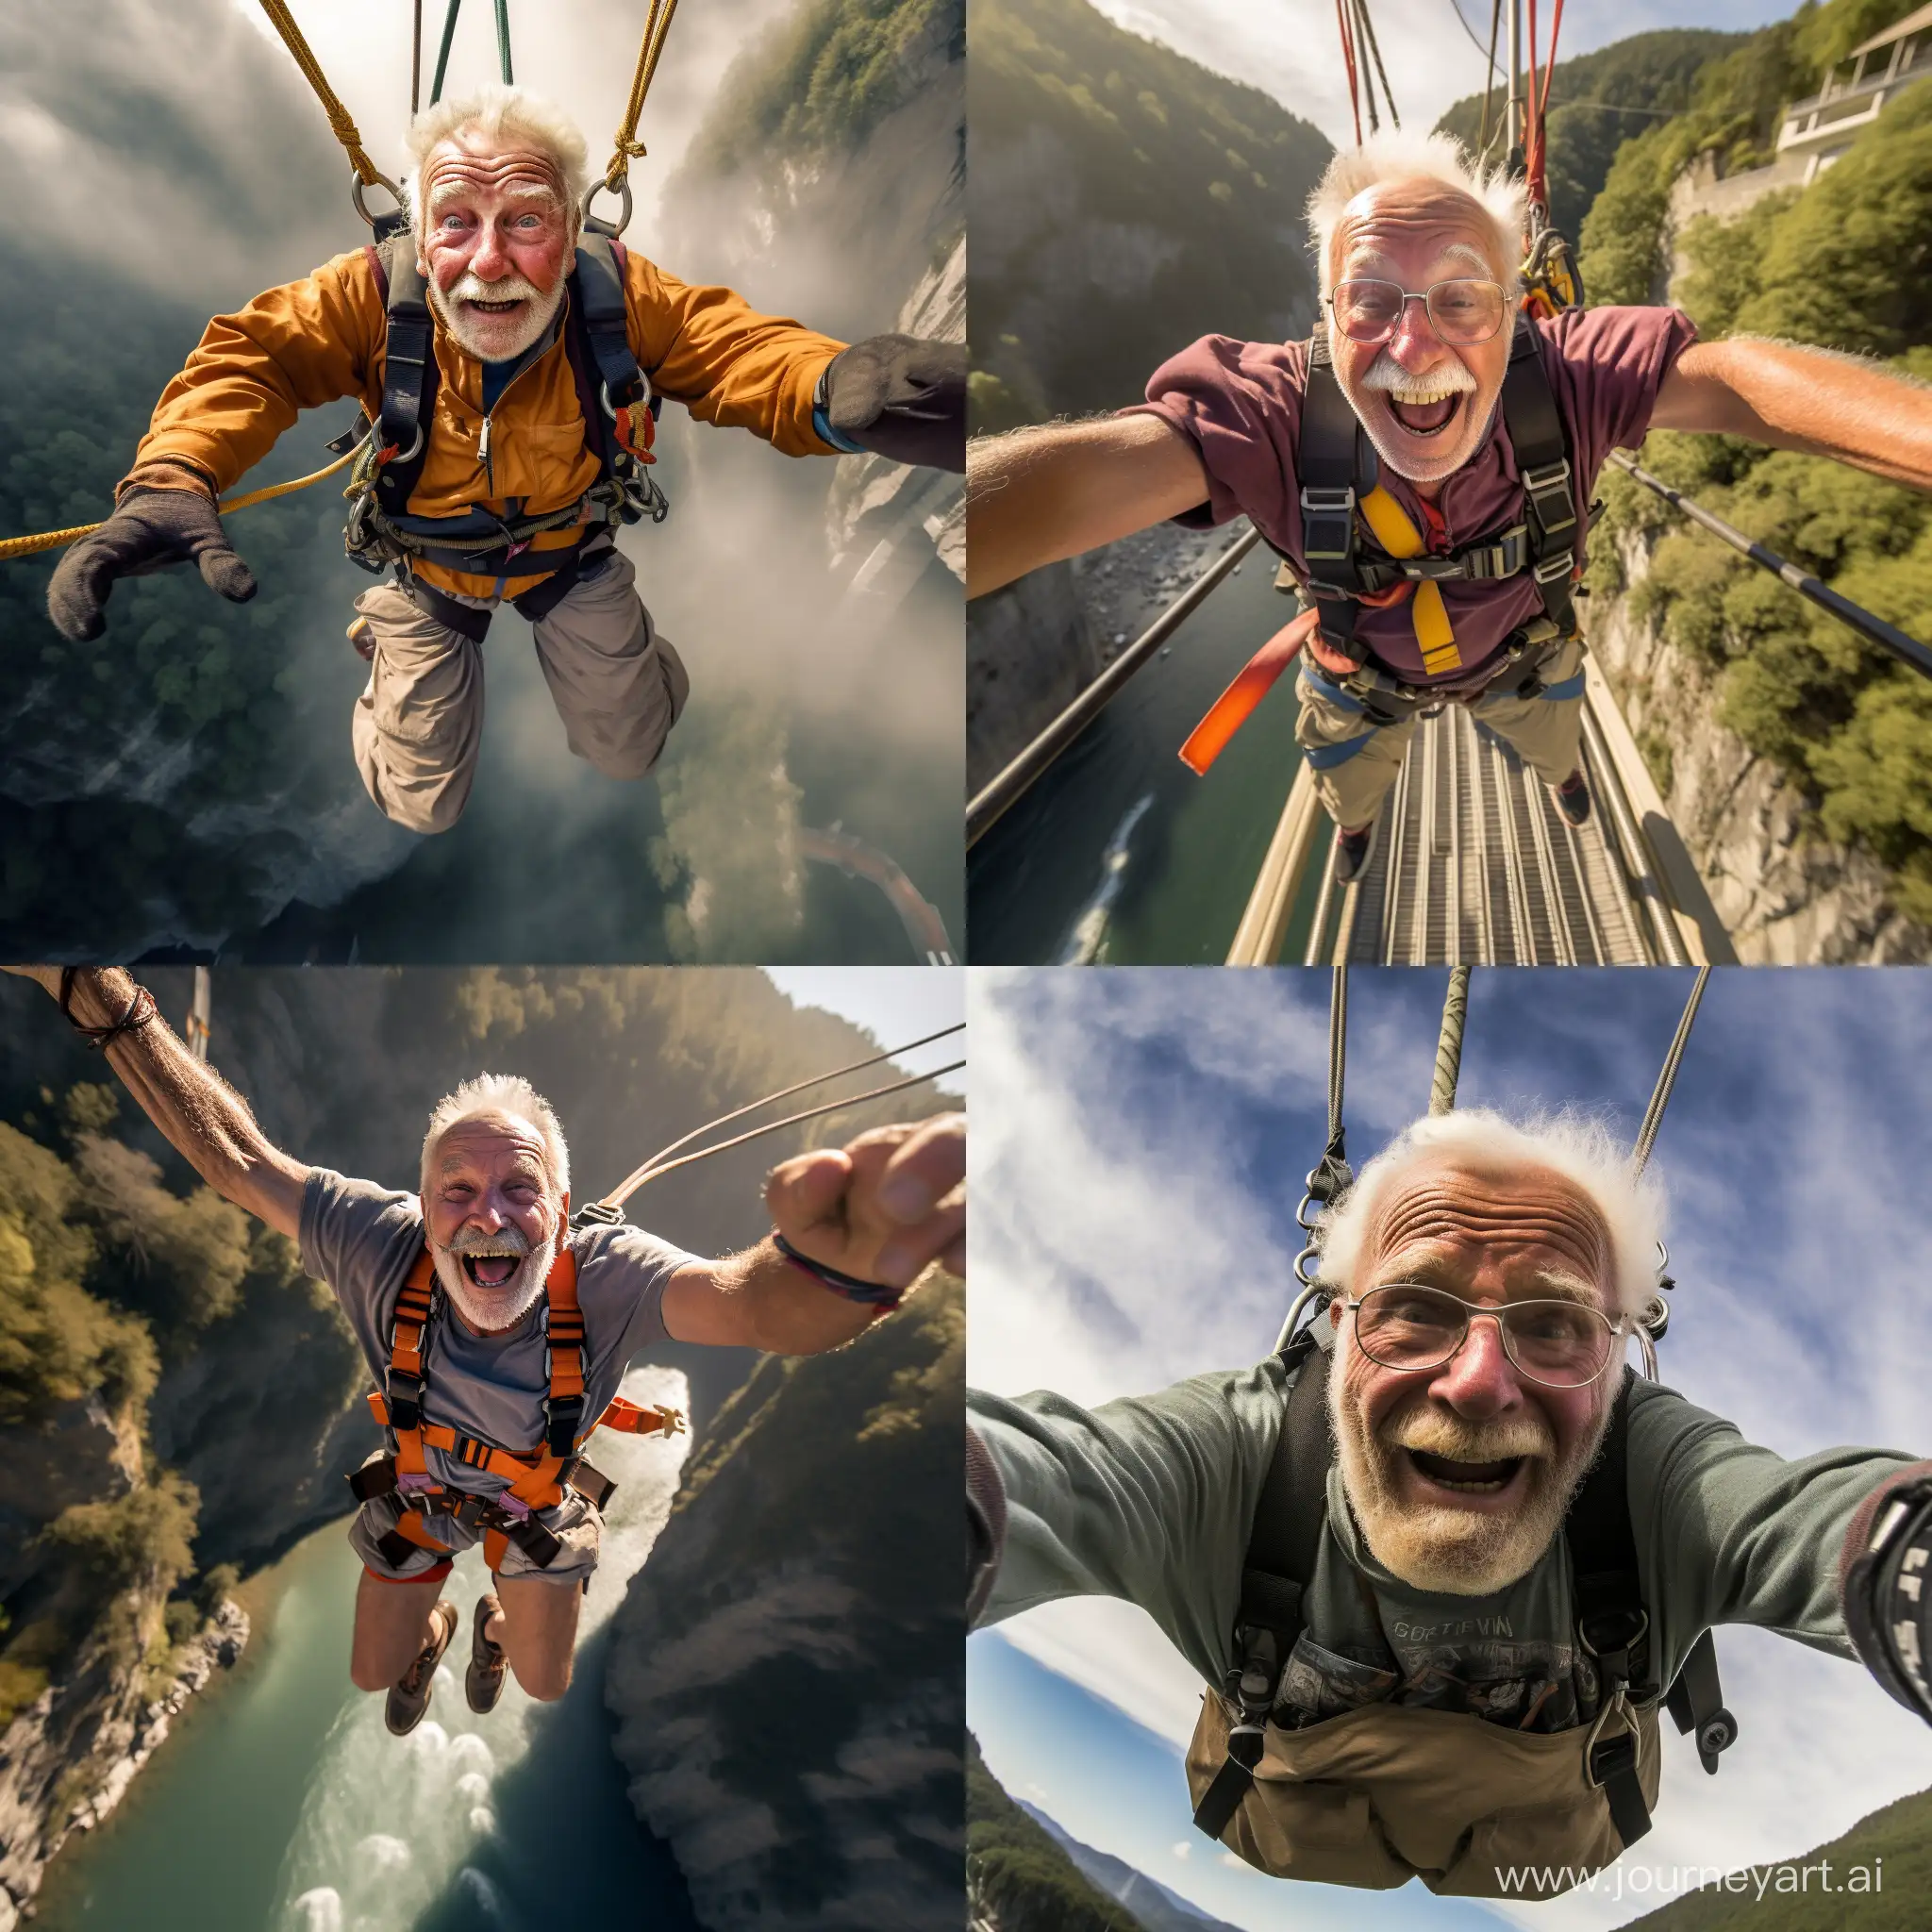 Create an ultra-high-definition photo that captures an exhilarating scene of an old man bungee jumping from a bridge. The perspective should be from a lower vantage point, looking upwards, to show the man in mid-fall with the bridge prominently visible above him. The bungee cord should be taut and clearly attached to the bridge, emphasizing the height and the thrill of the jump. The old man, with a wide grin on his face, should embody a sense of joy and exhilaration, adding a dynamic and lively element to the scene. The image should be set during the golden hour, where the warm, vibrant colors of the sunset enhance the details and textures, giving a rich, vivid quality to the photo. This scene should capture the essence of an adventurous spirit and the excitement of a once-in-a-lifetime experience, all framed within the beauty of golden hour lighting, reminiscent of the high-quality imagery produced by a Sigma lens